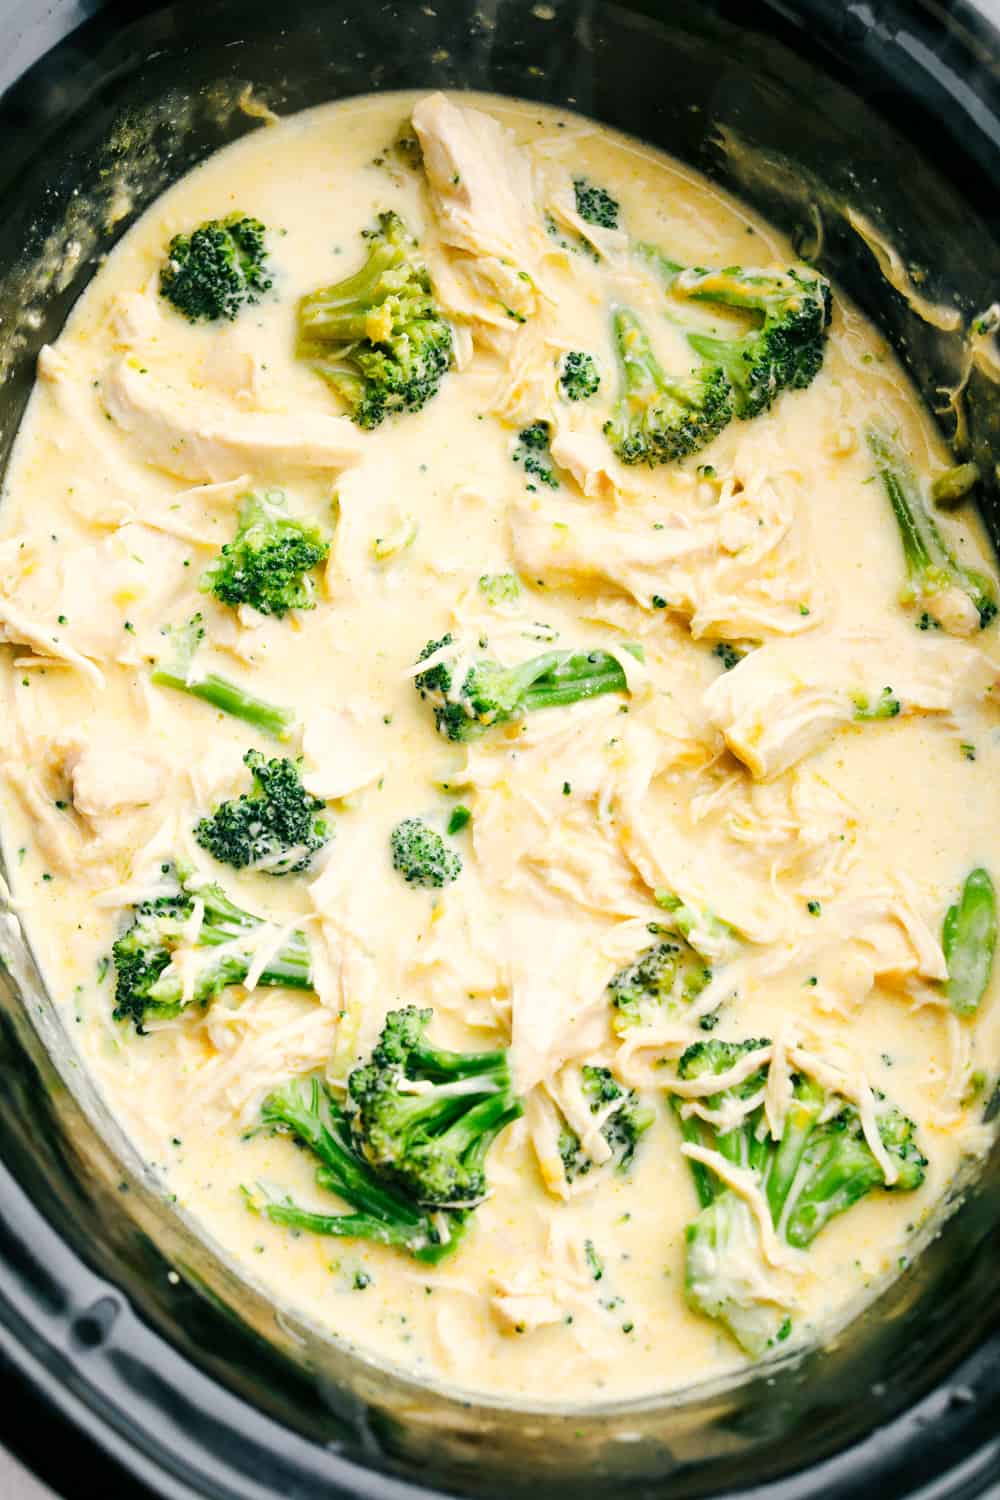 Slow Cooker Chicken and Broccoli in a creamy sauce.